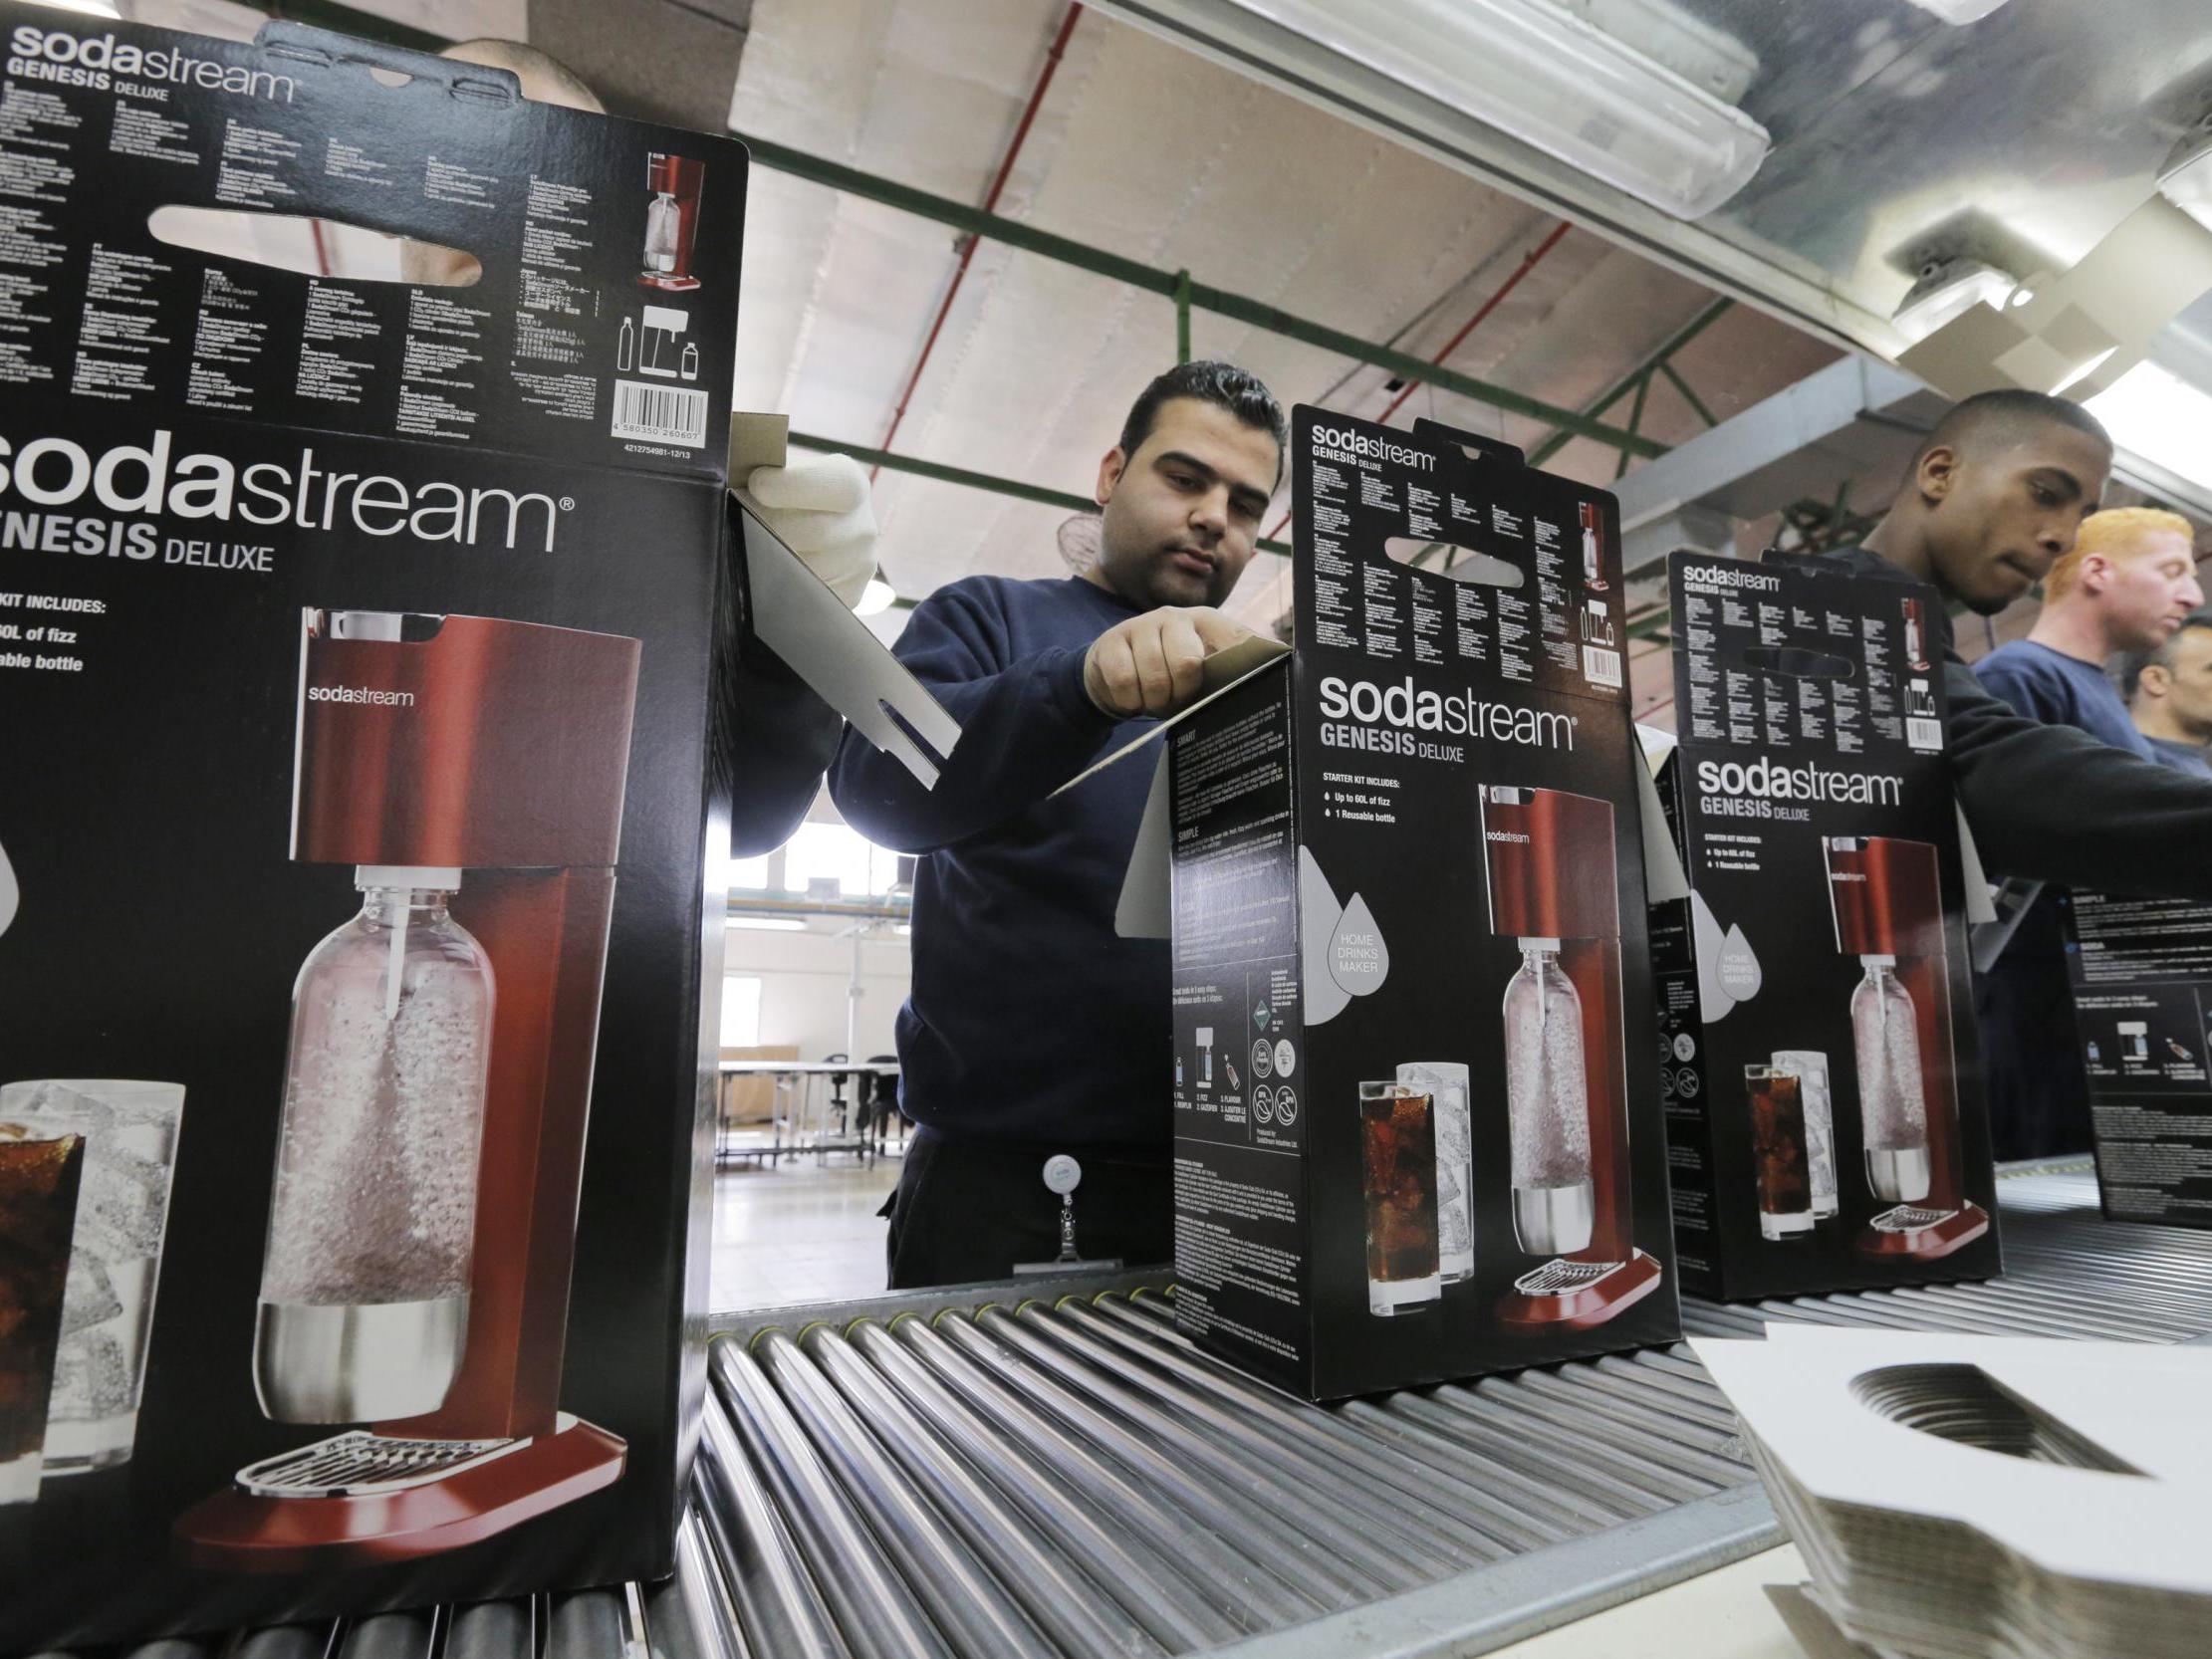 SodaStream switched focus from sugary soft drinks to sparkling water a few years ago